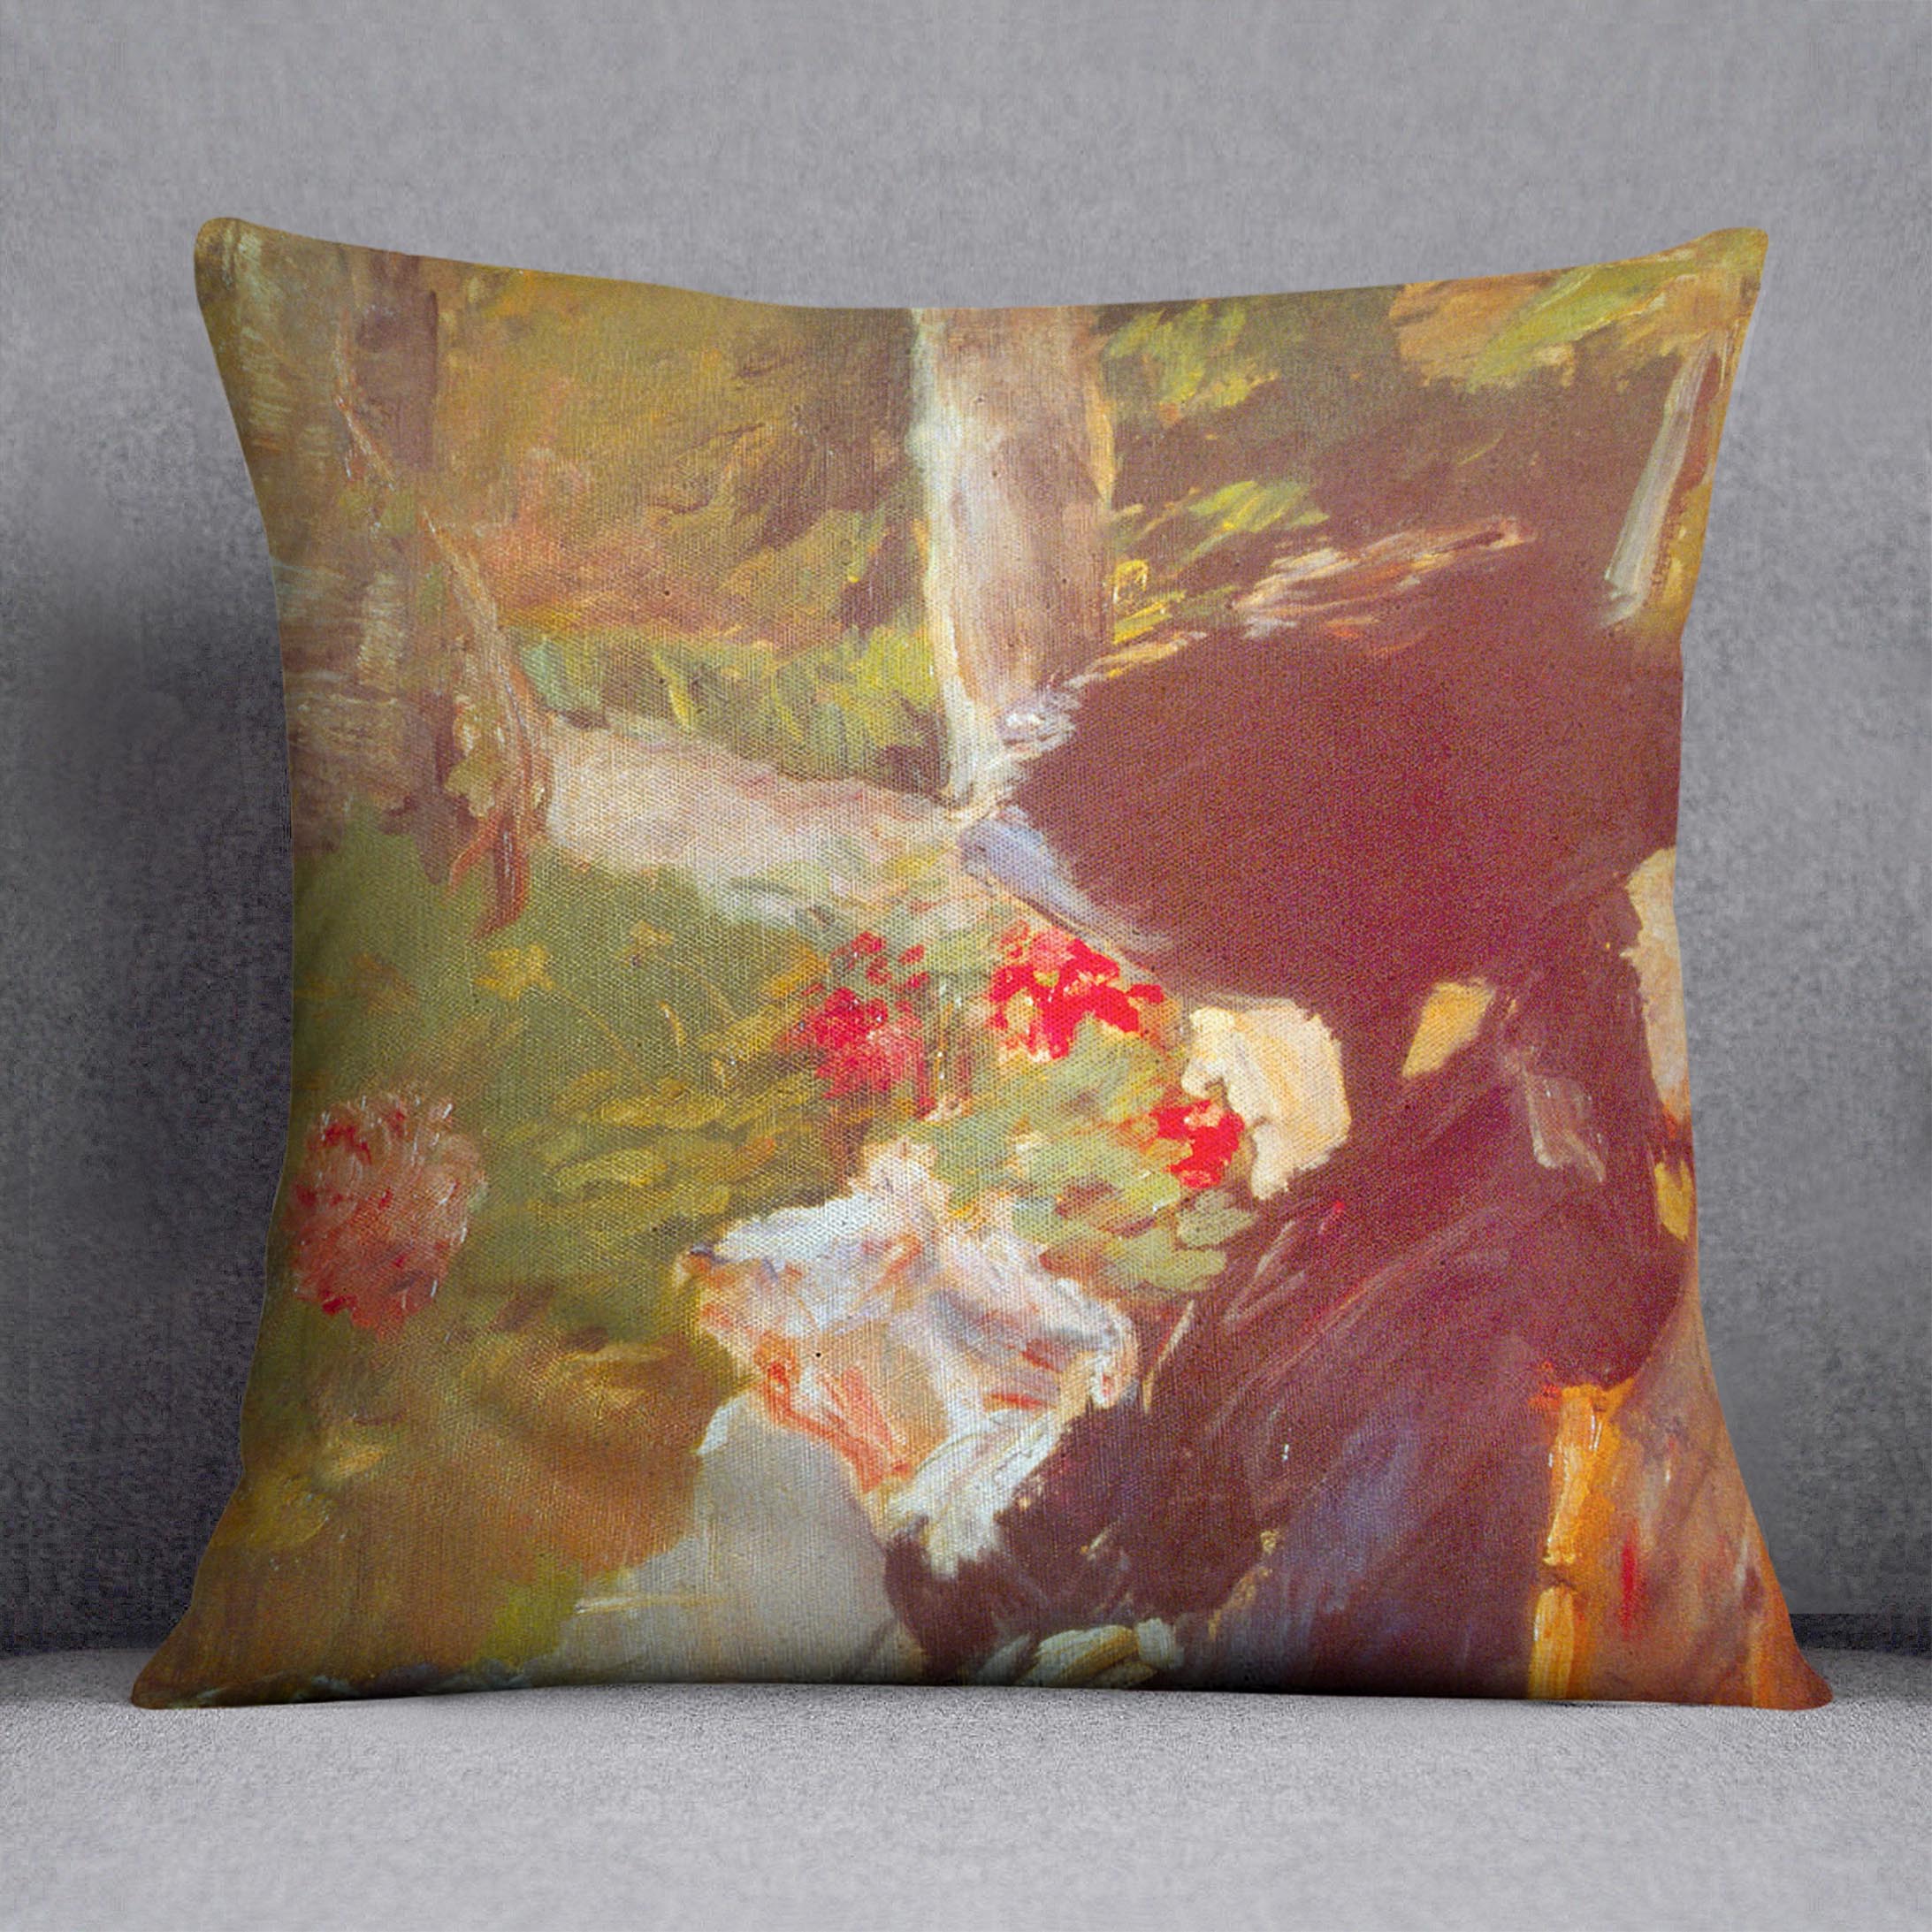 Manets Mother by Manet Cushion